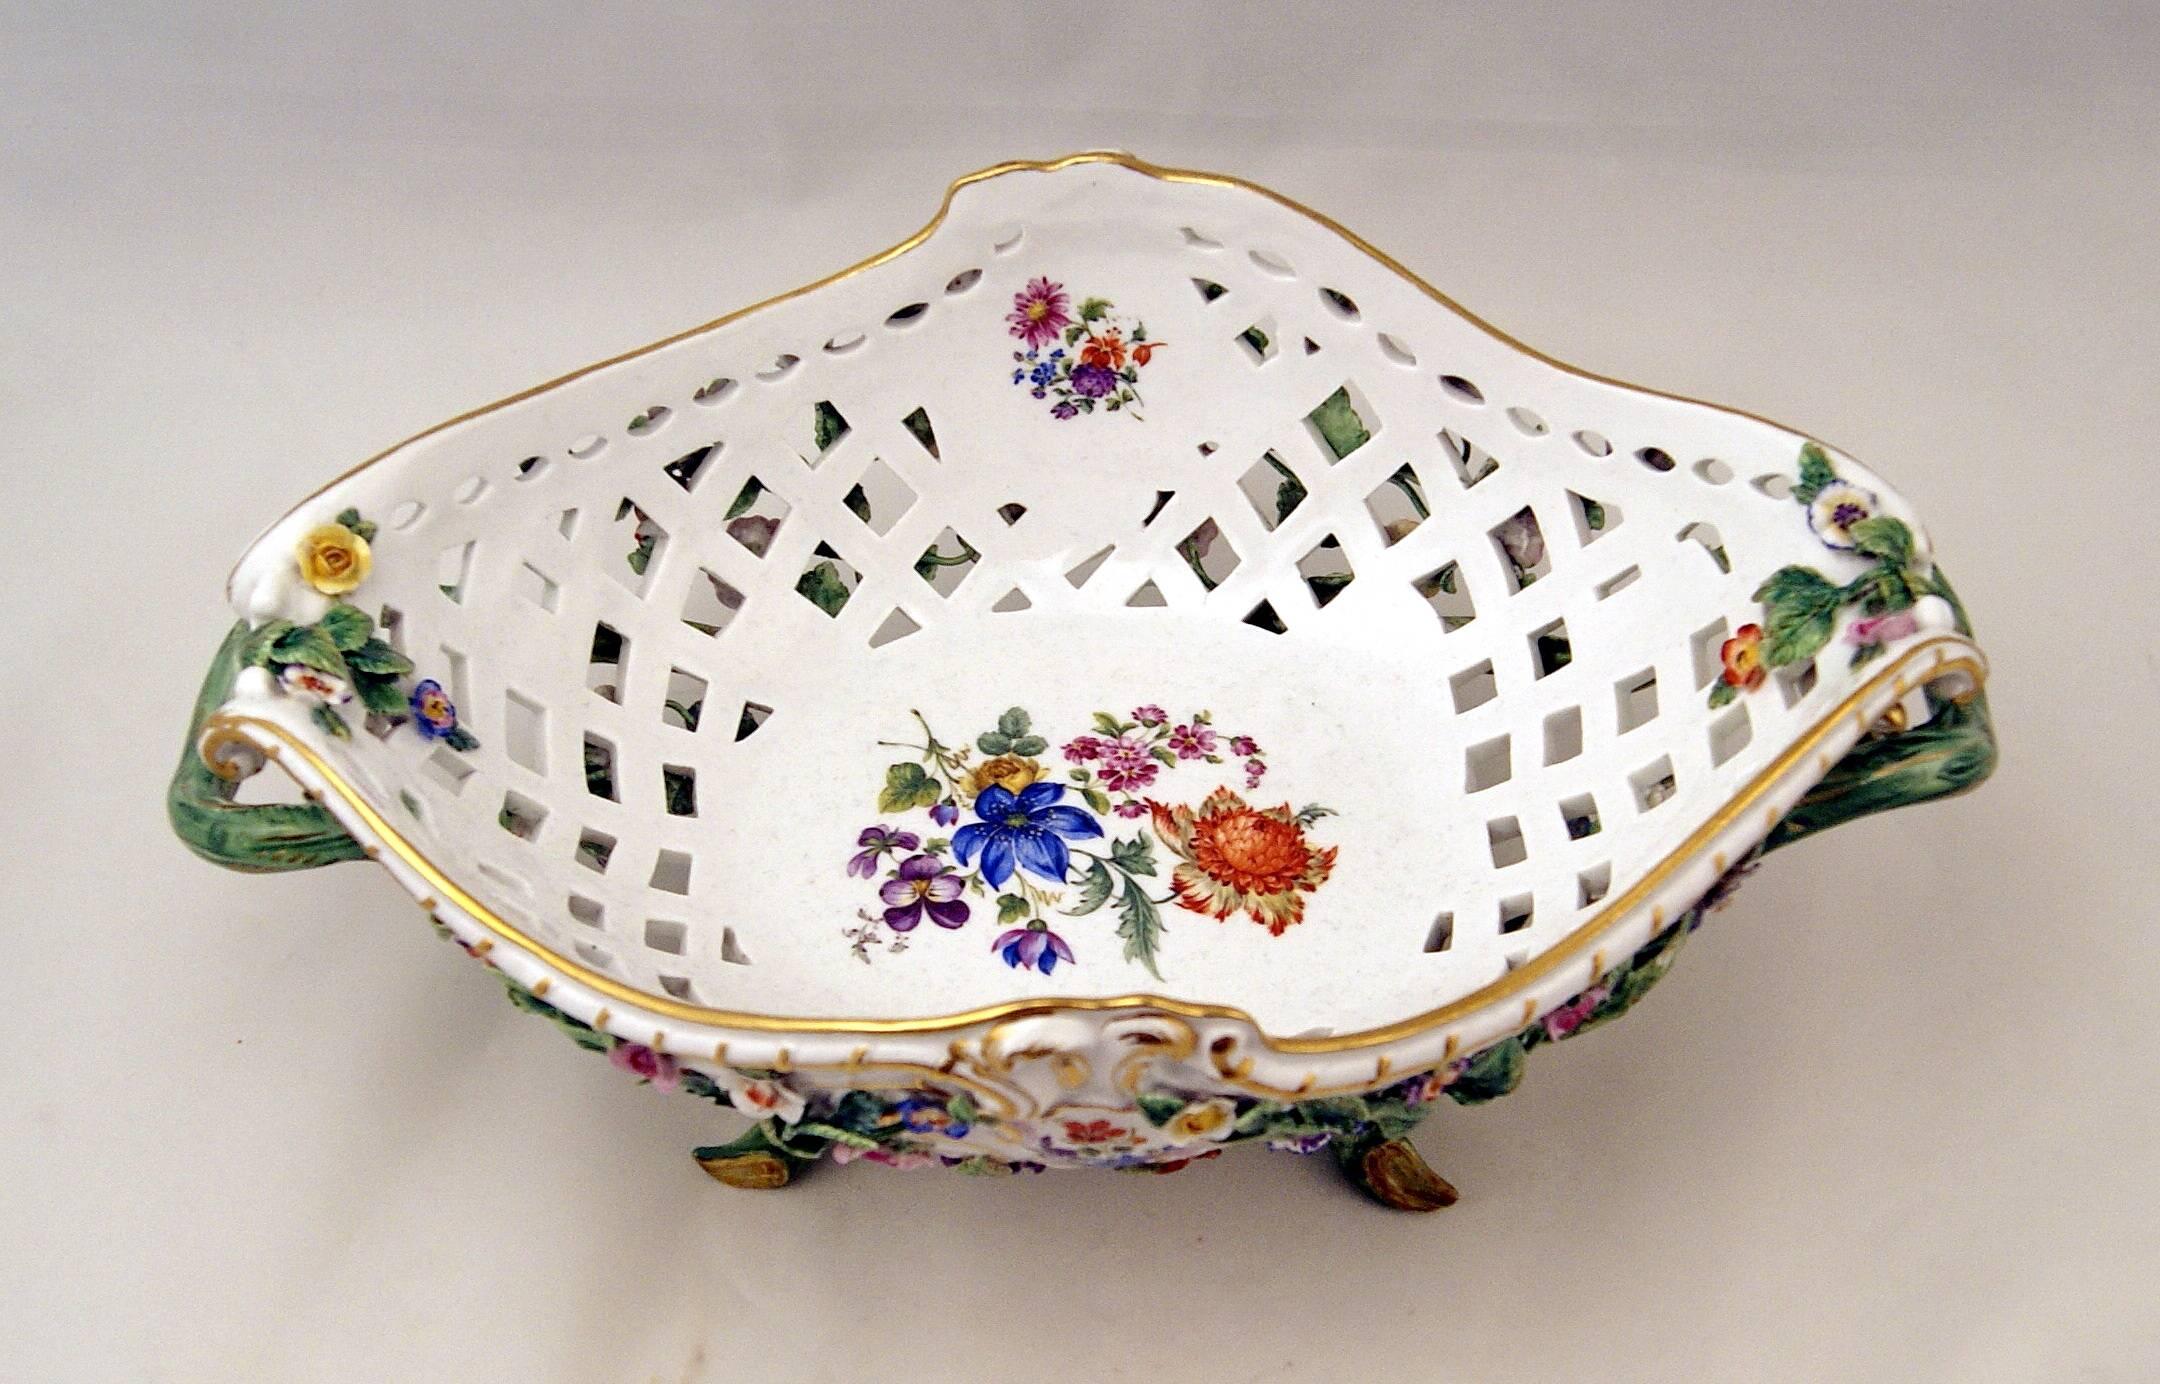 Rococo Meissen Large Oval Reticulated Basket Bowl with Flowers, circa 1850-1860